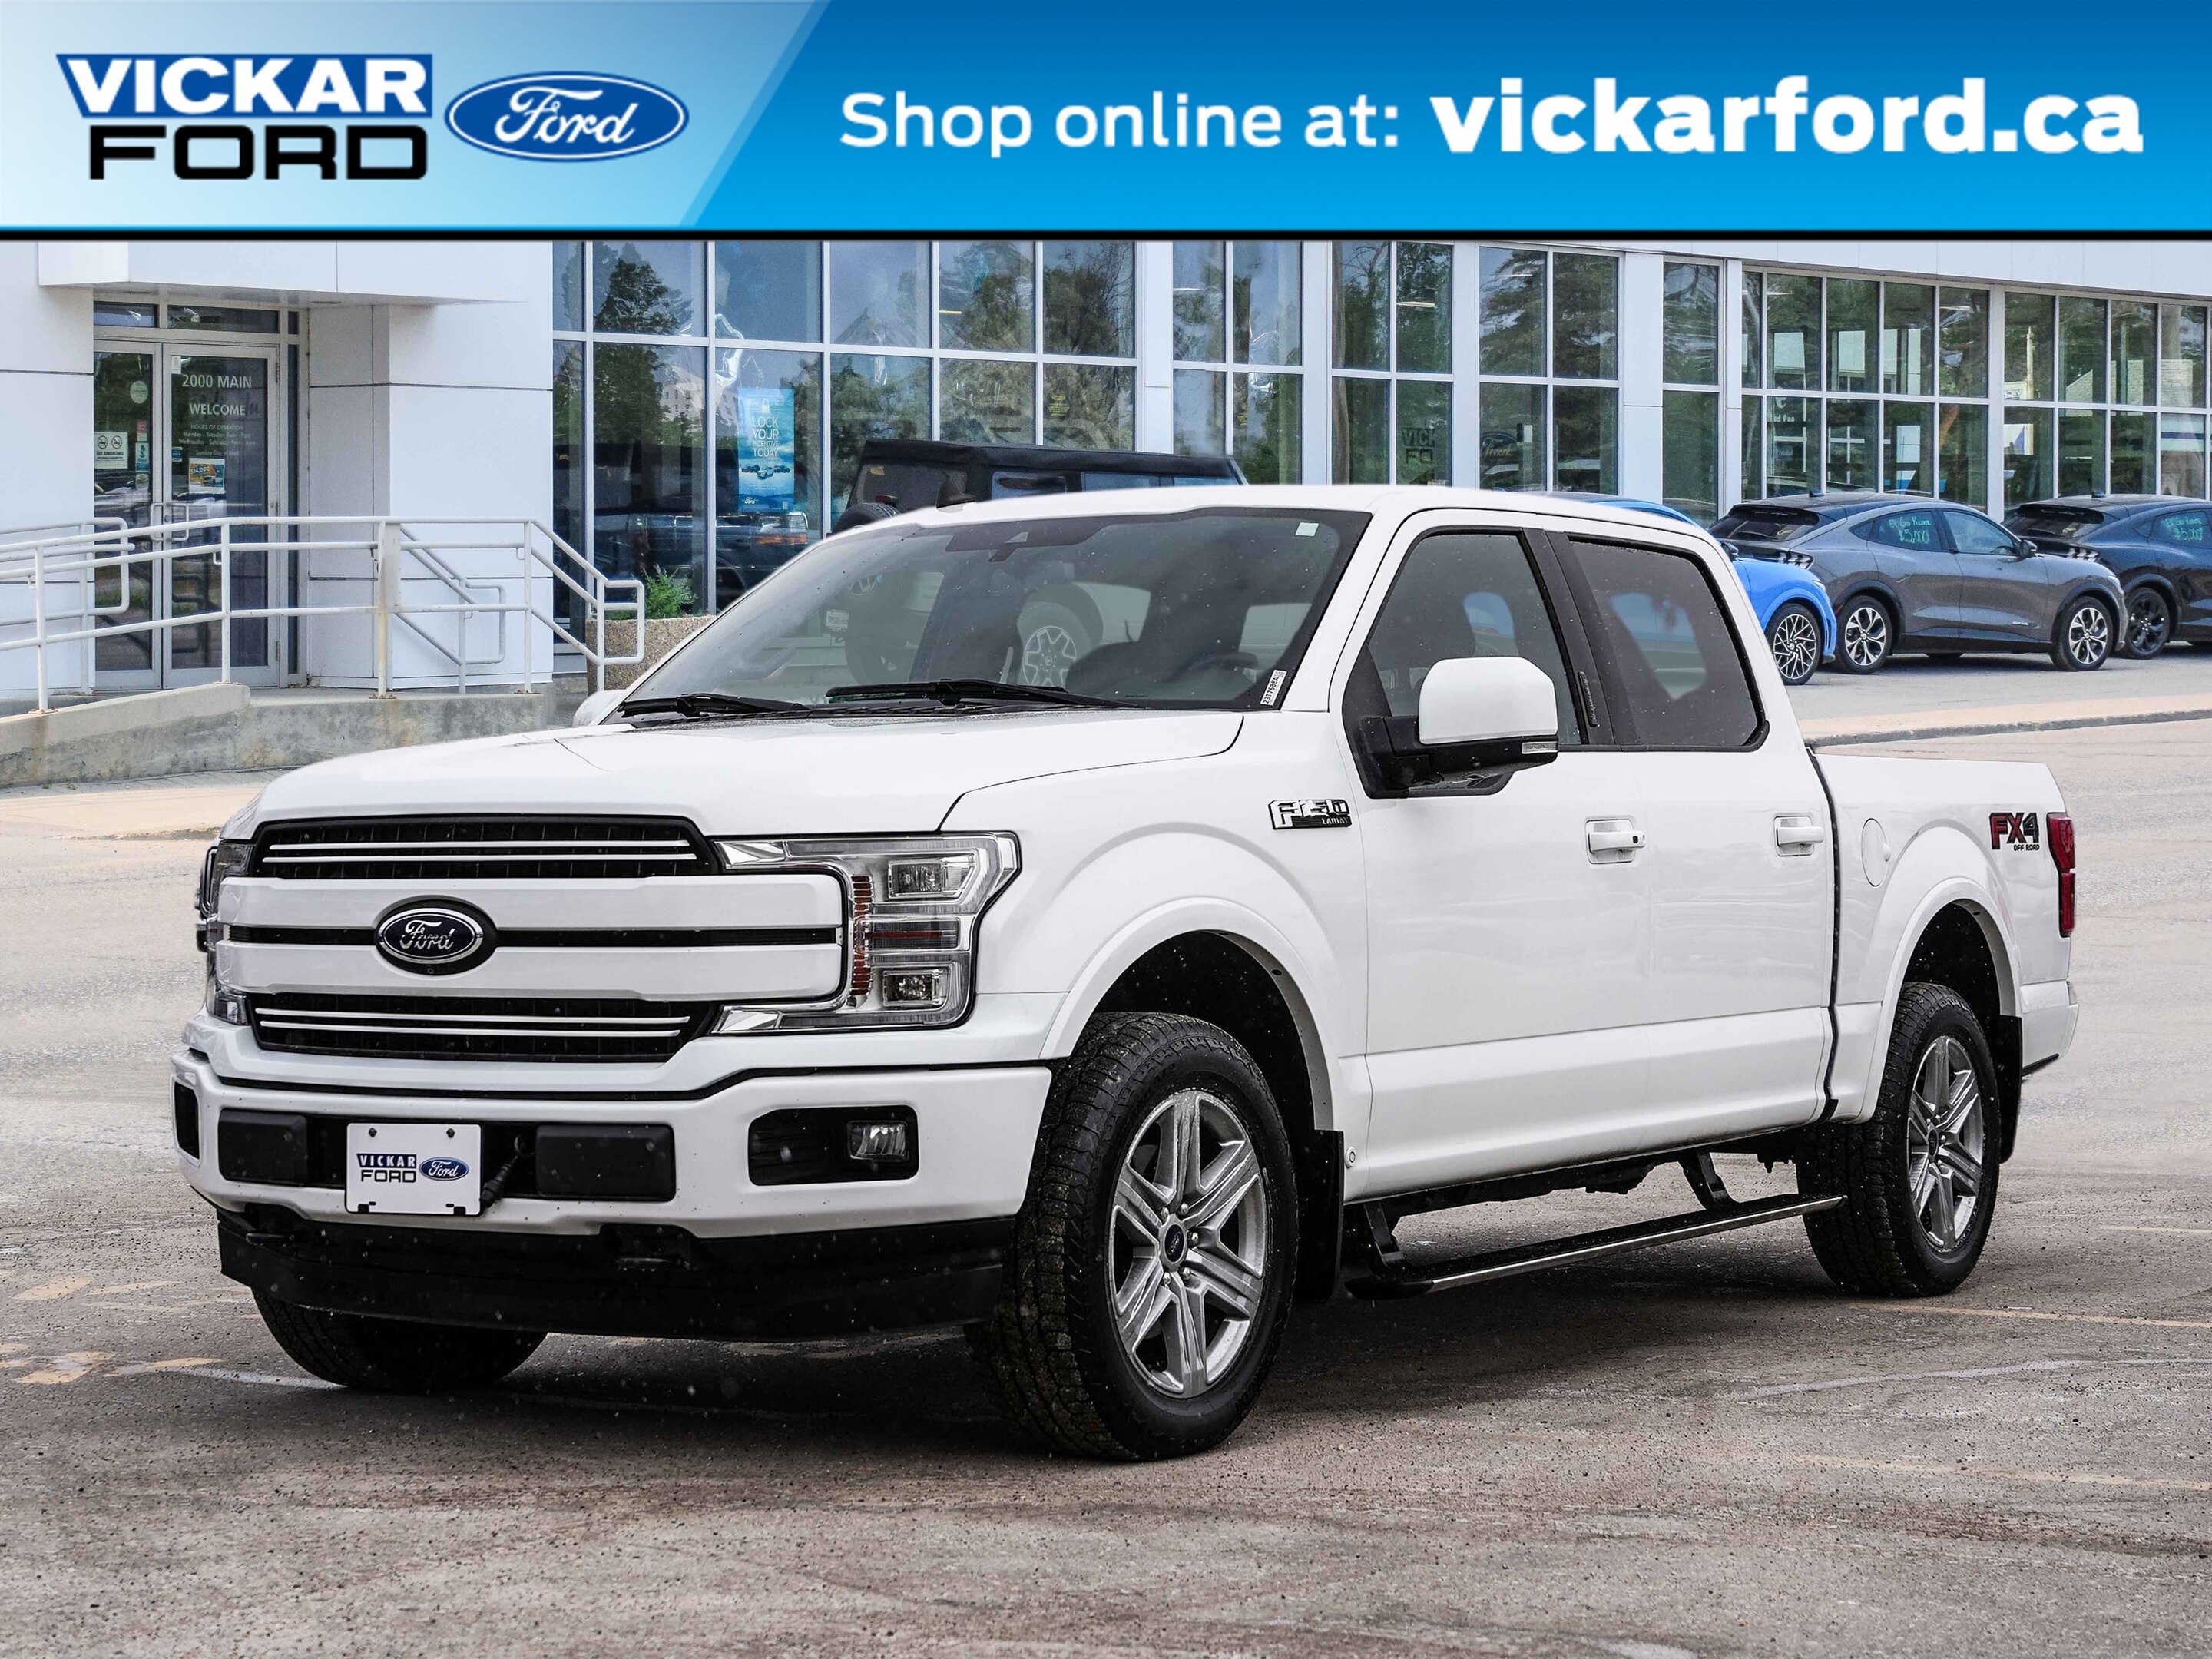 2019 Ford F-150 LARIAT 4WD Crew 502A Sport Package 3.5L Ecoboost 